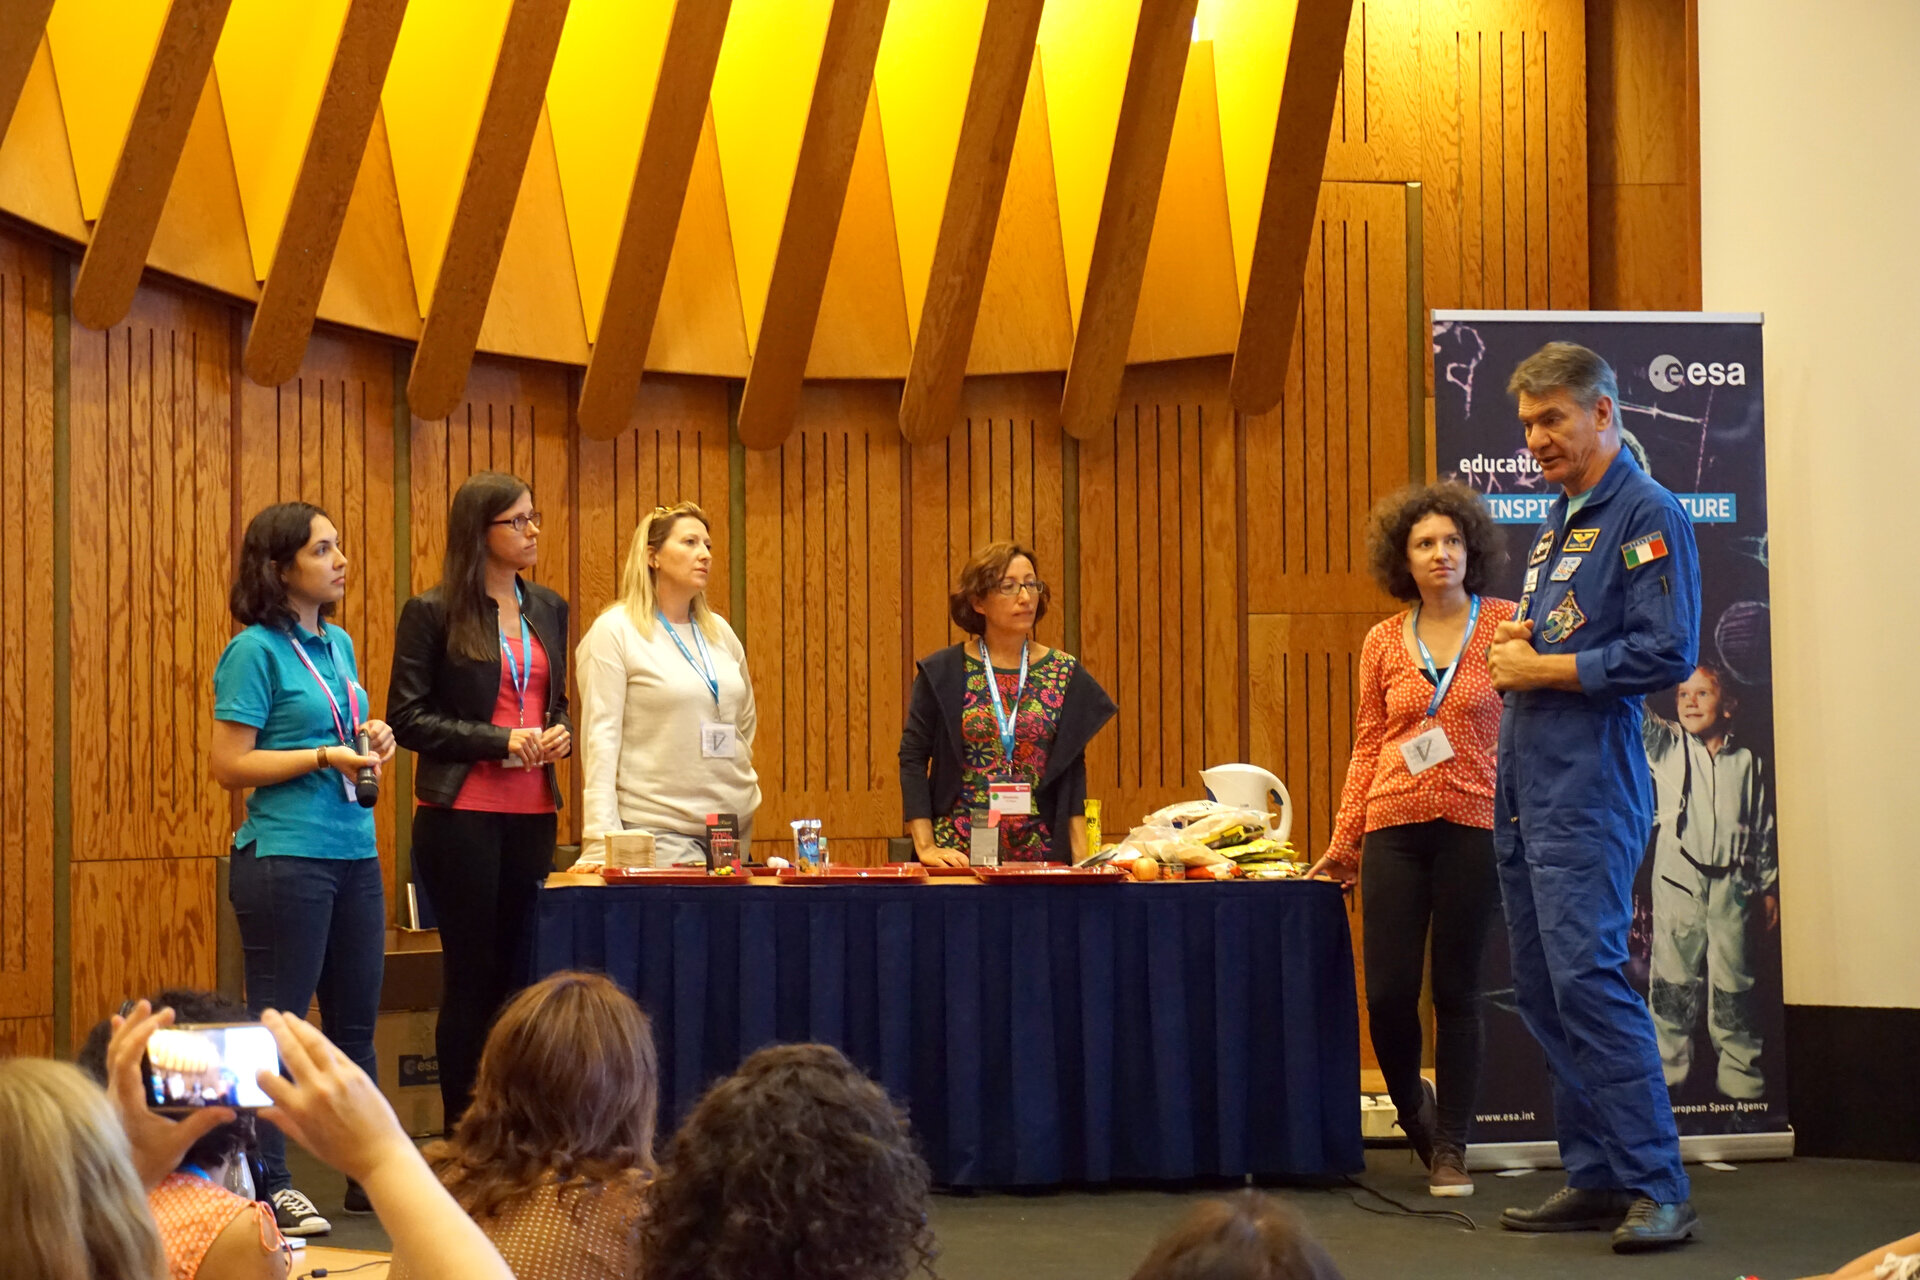 Astronaut Paolo Nespoli participating in a practical session with the teachers